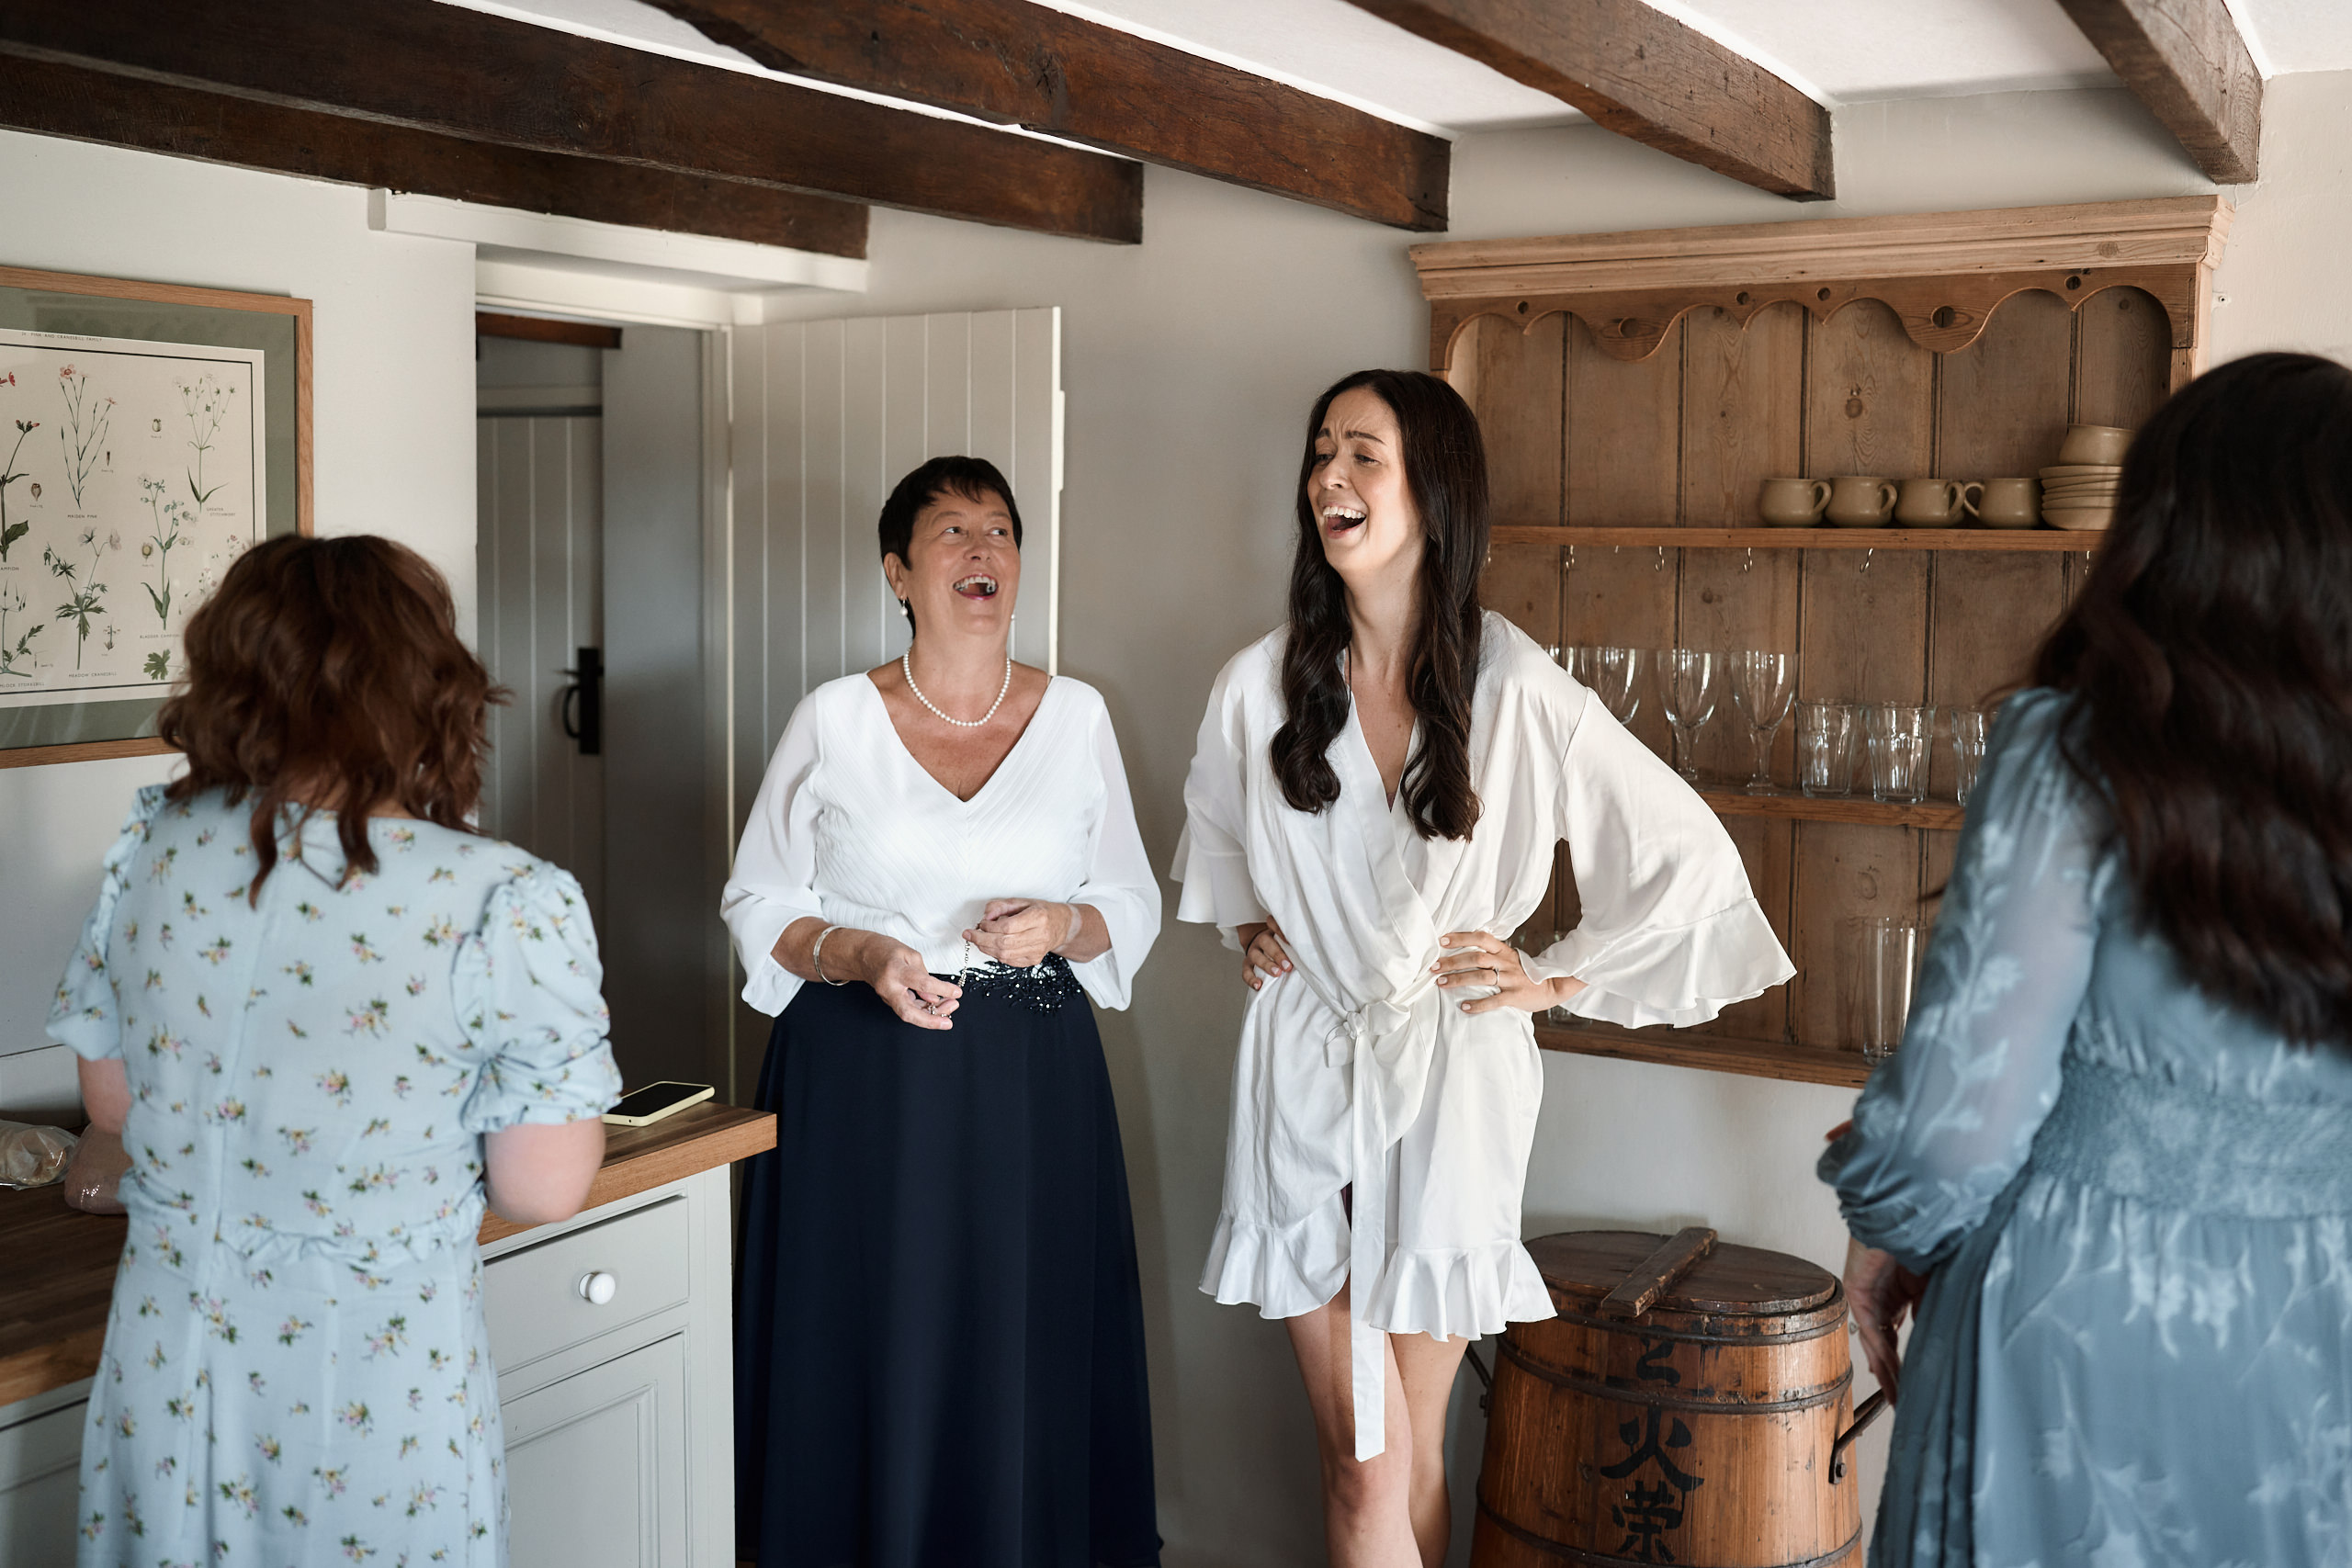 The bride and her friends are chilling out and having a good time in the kitchen.